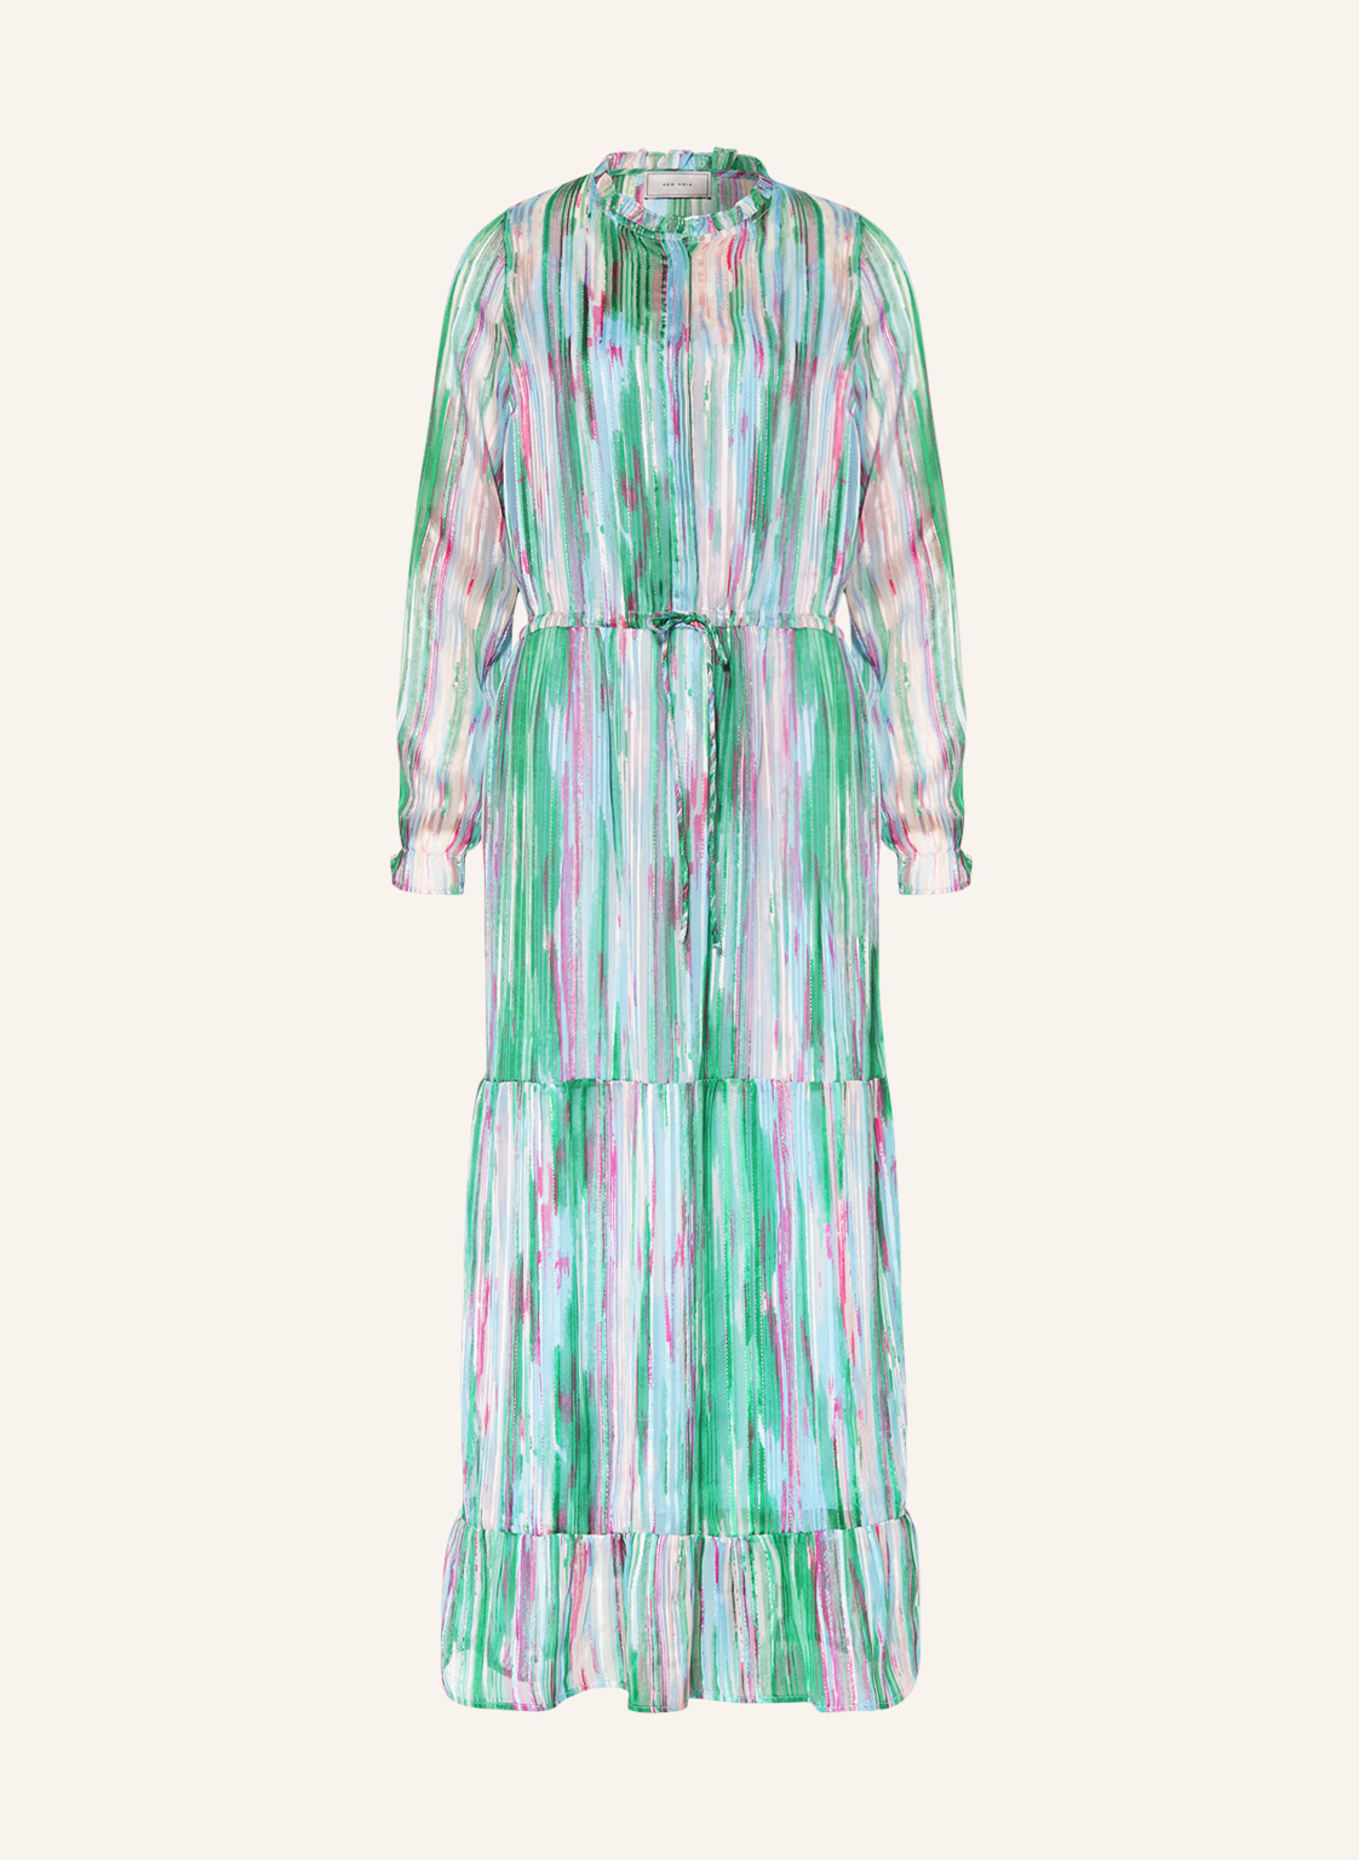 NEO NOIR Dress SILO with glitter and frills in green/ light blue/ pink